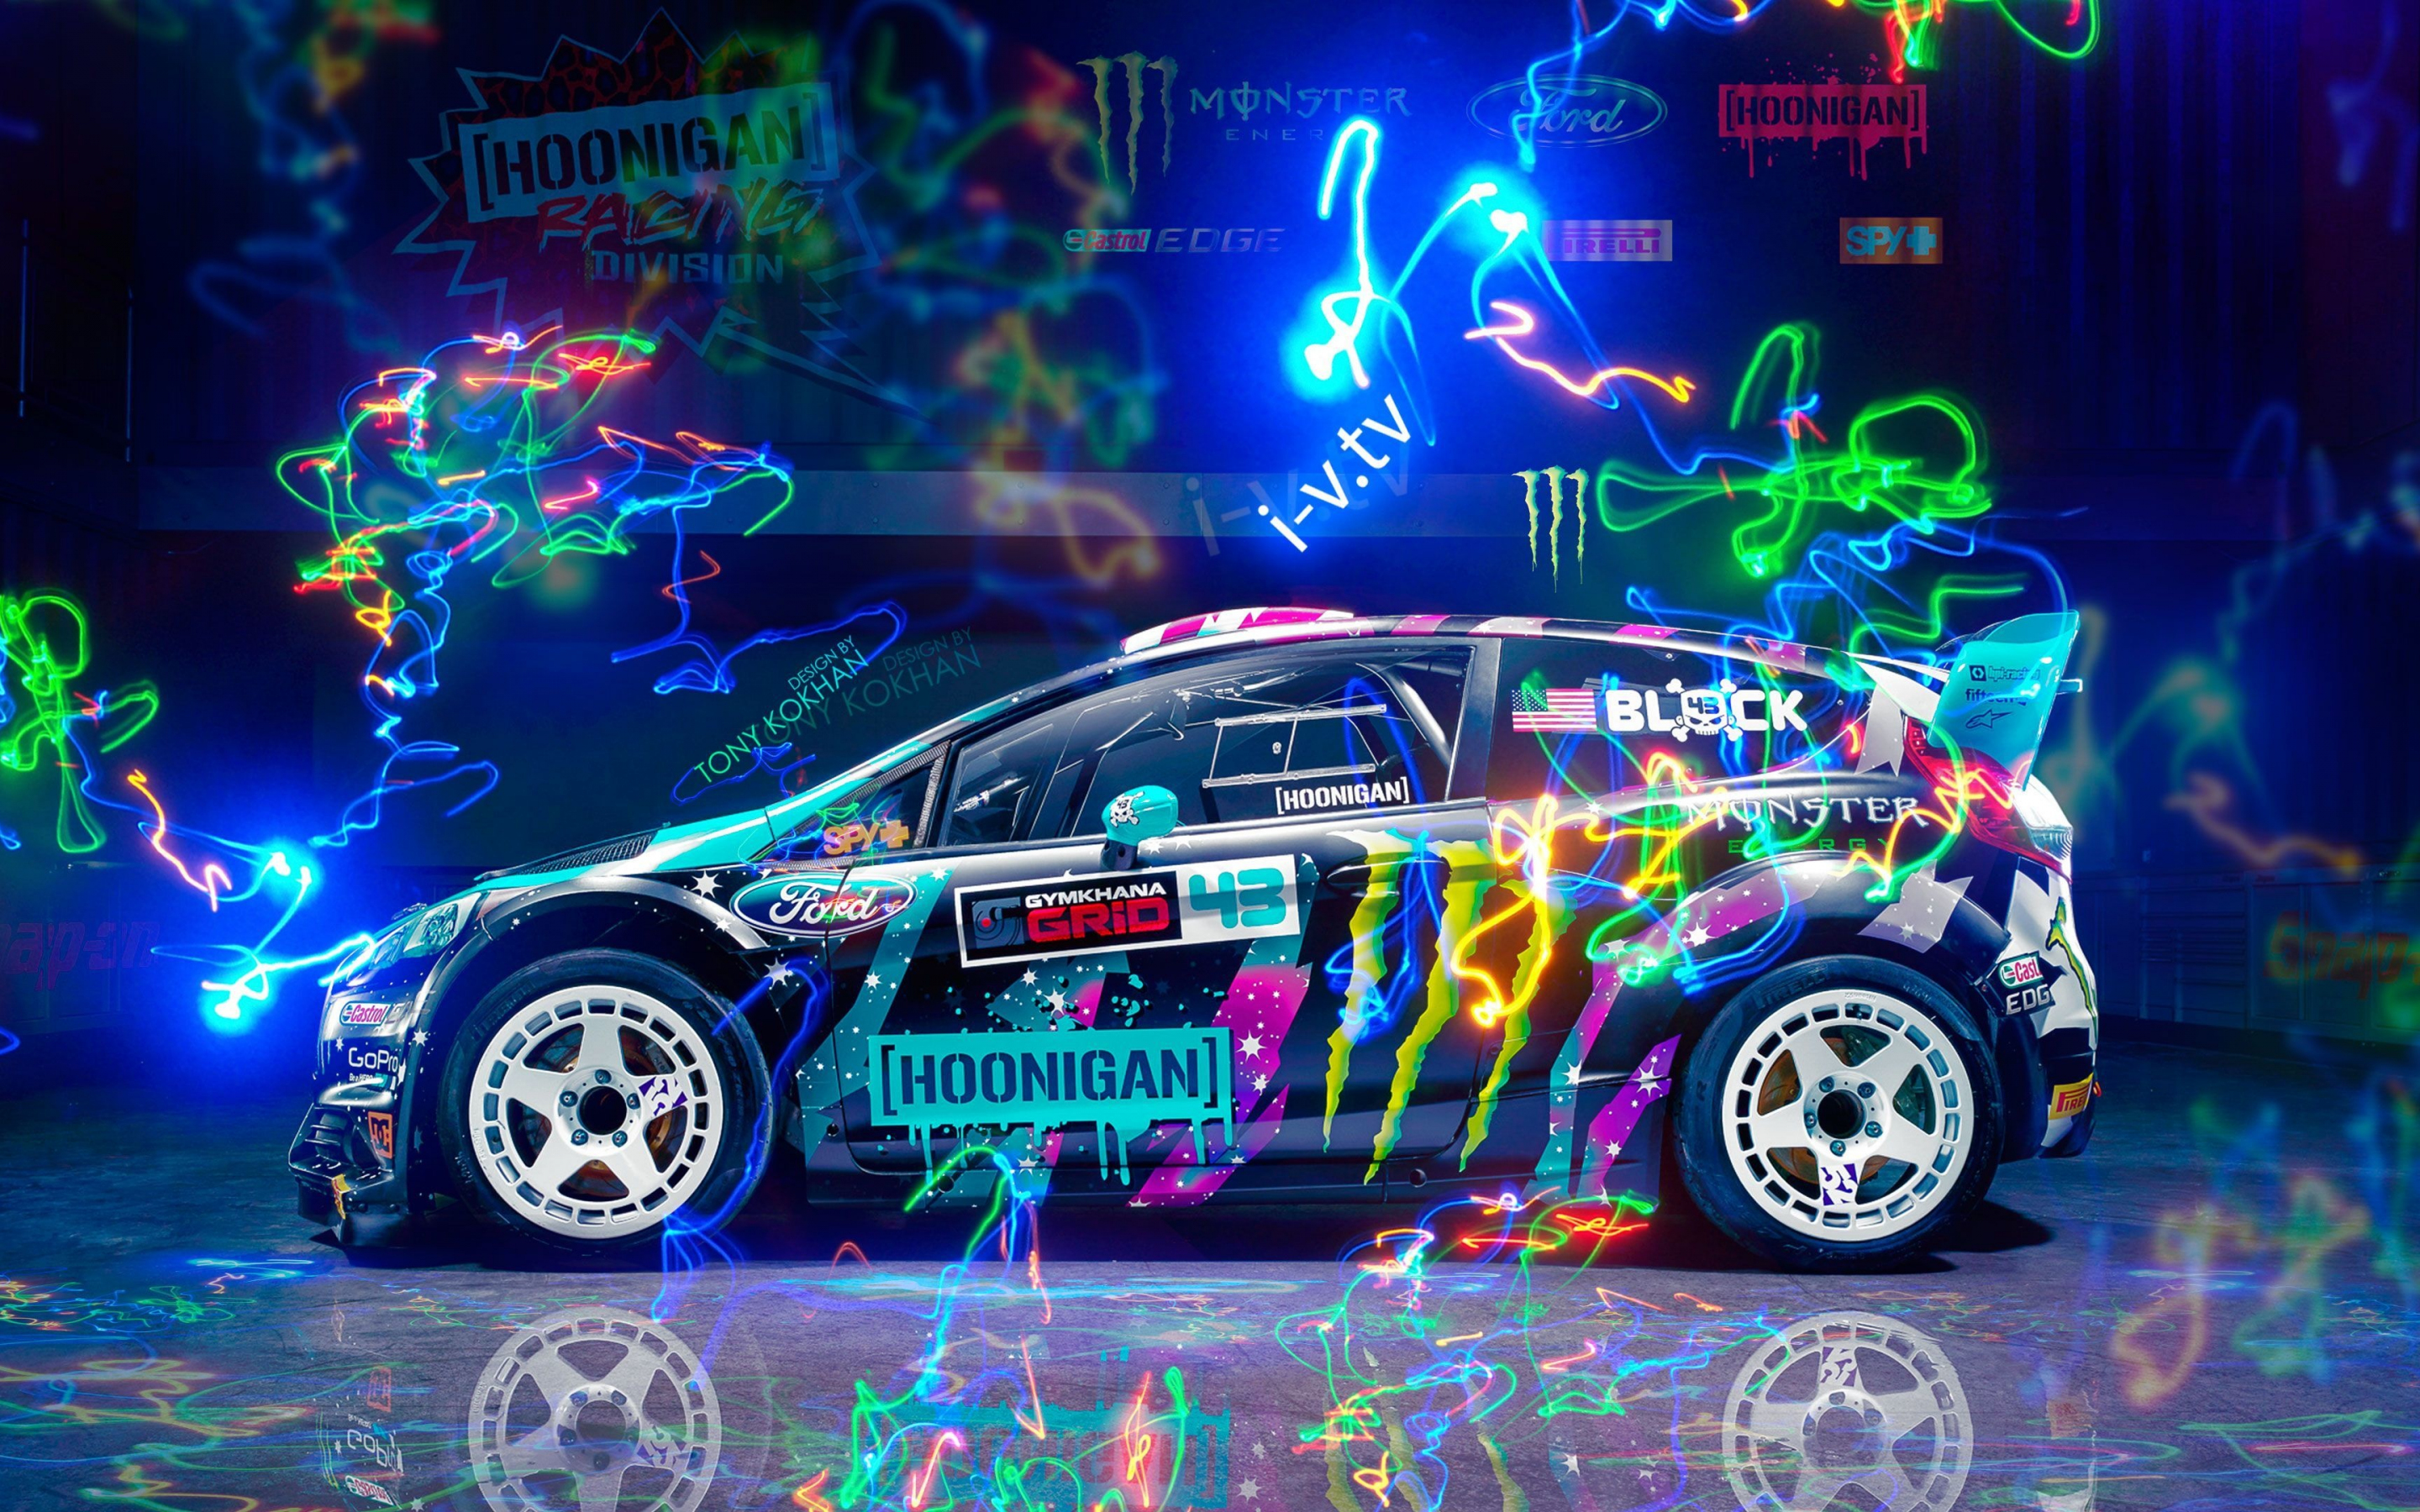 Ford, Ford fiesta, compact car, colorful art, 2880x1800 wallpaper